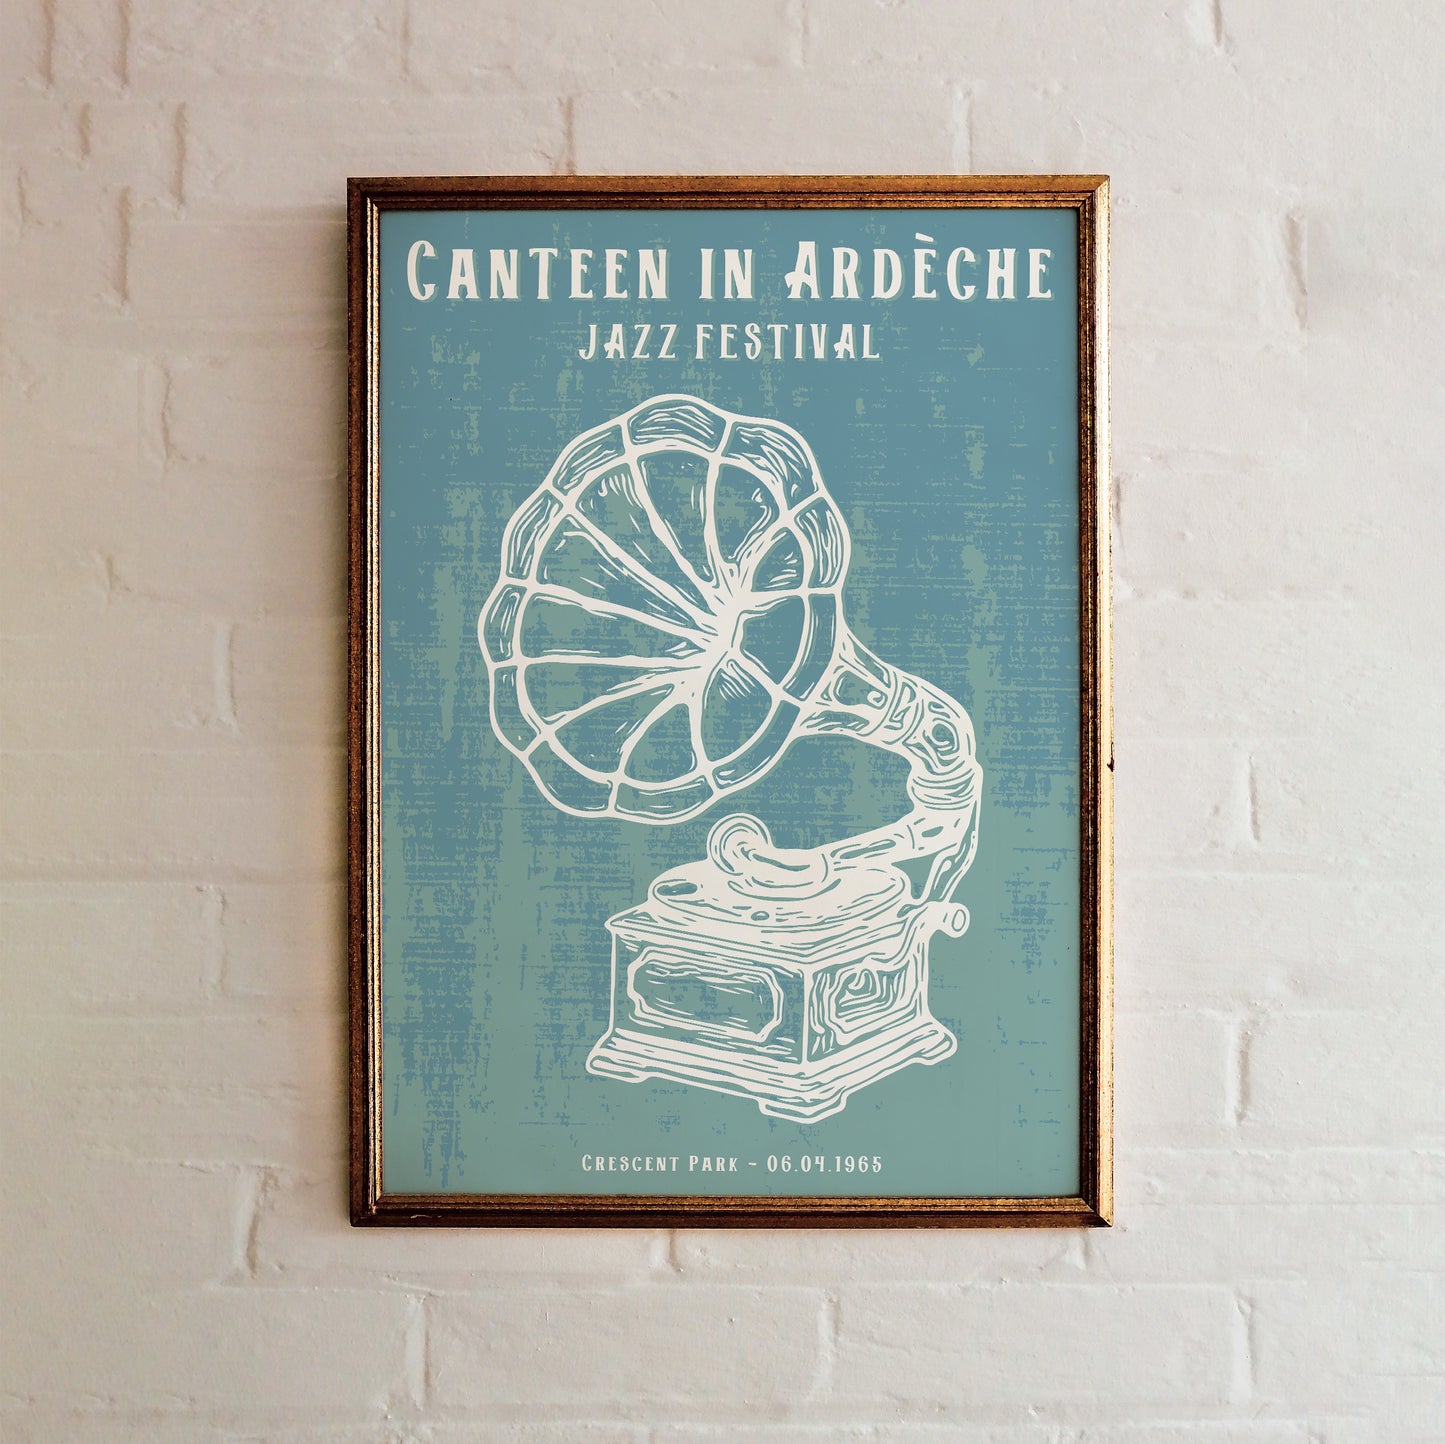 Canteen in Ardèche Jazz Festival Poster